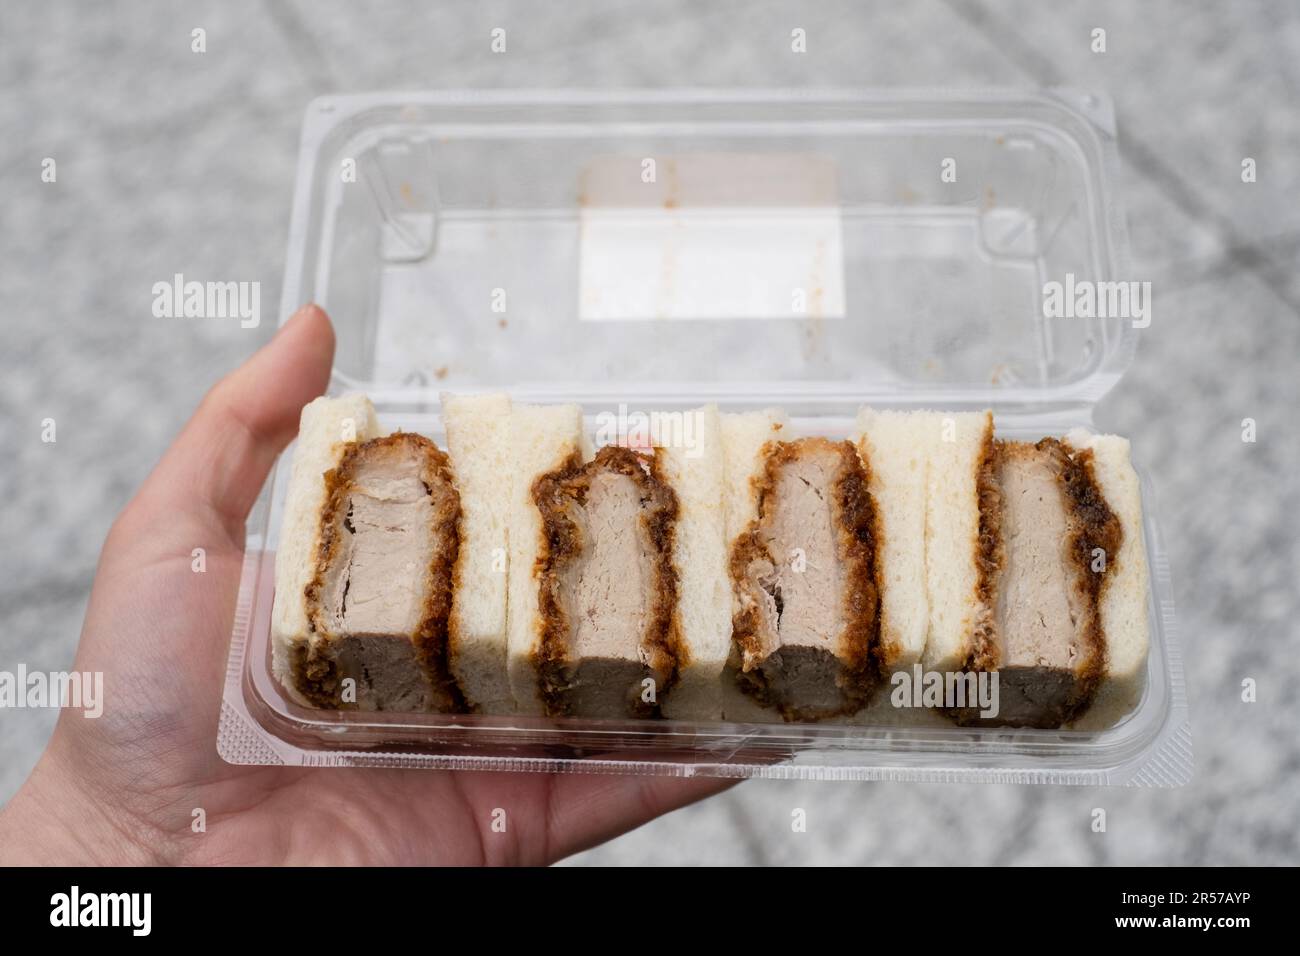 Pork cutlet fillet sandwich from a convenience store. Stock Photo